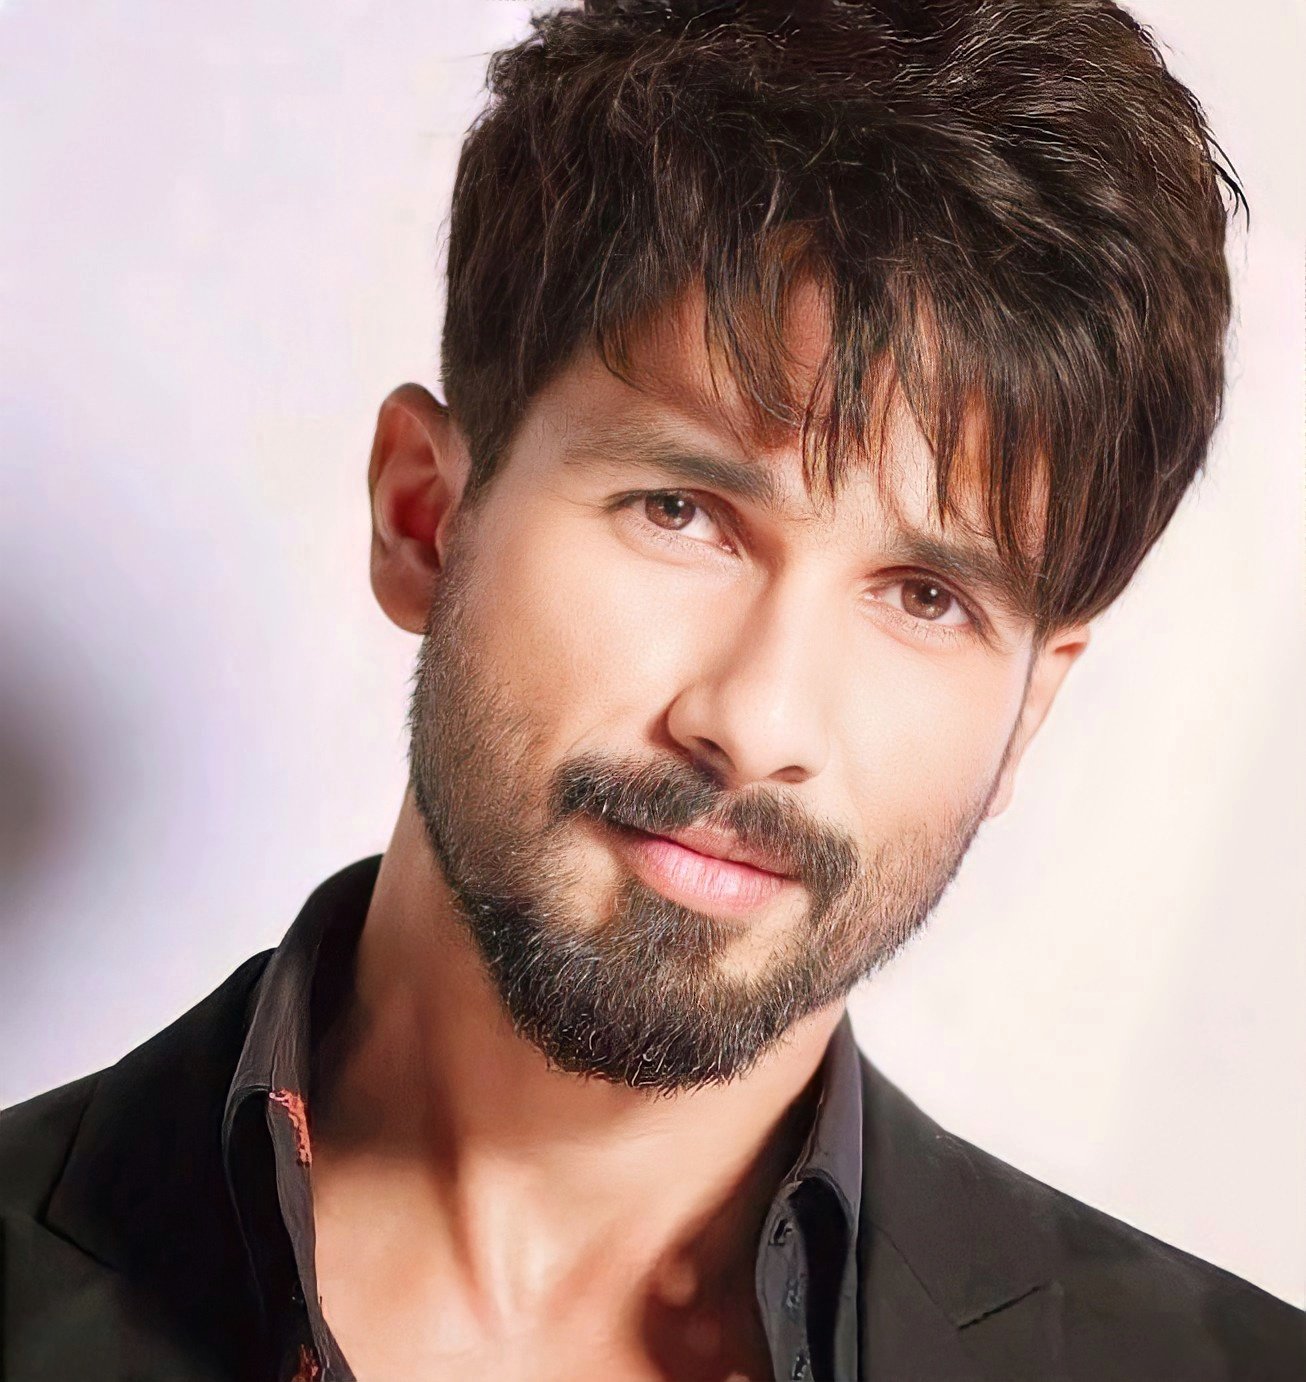 Top 18 Best Shahid Kapoor Hairstyles – Health & Healthier | Short hair  images, Try new hairstyles, Haircut images